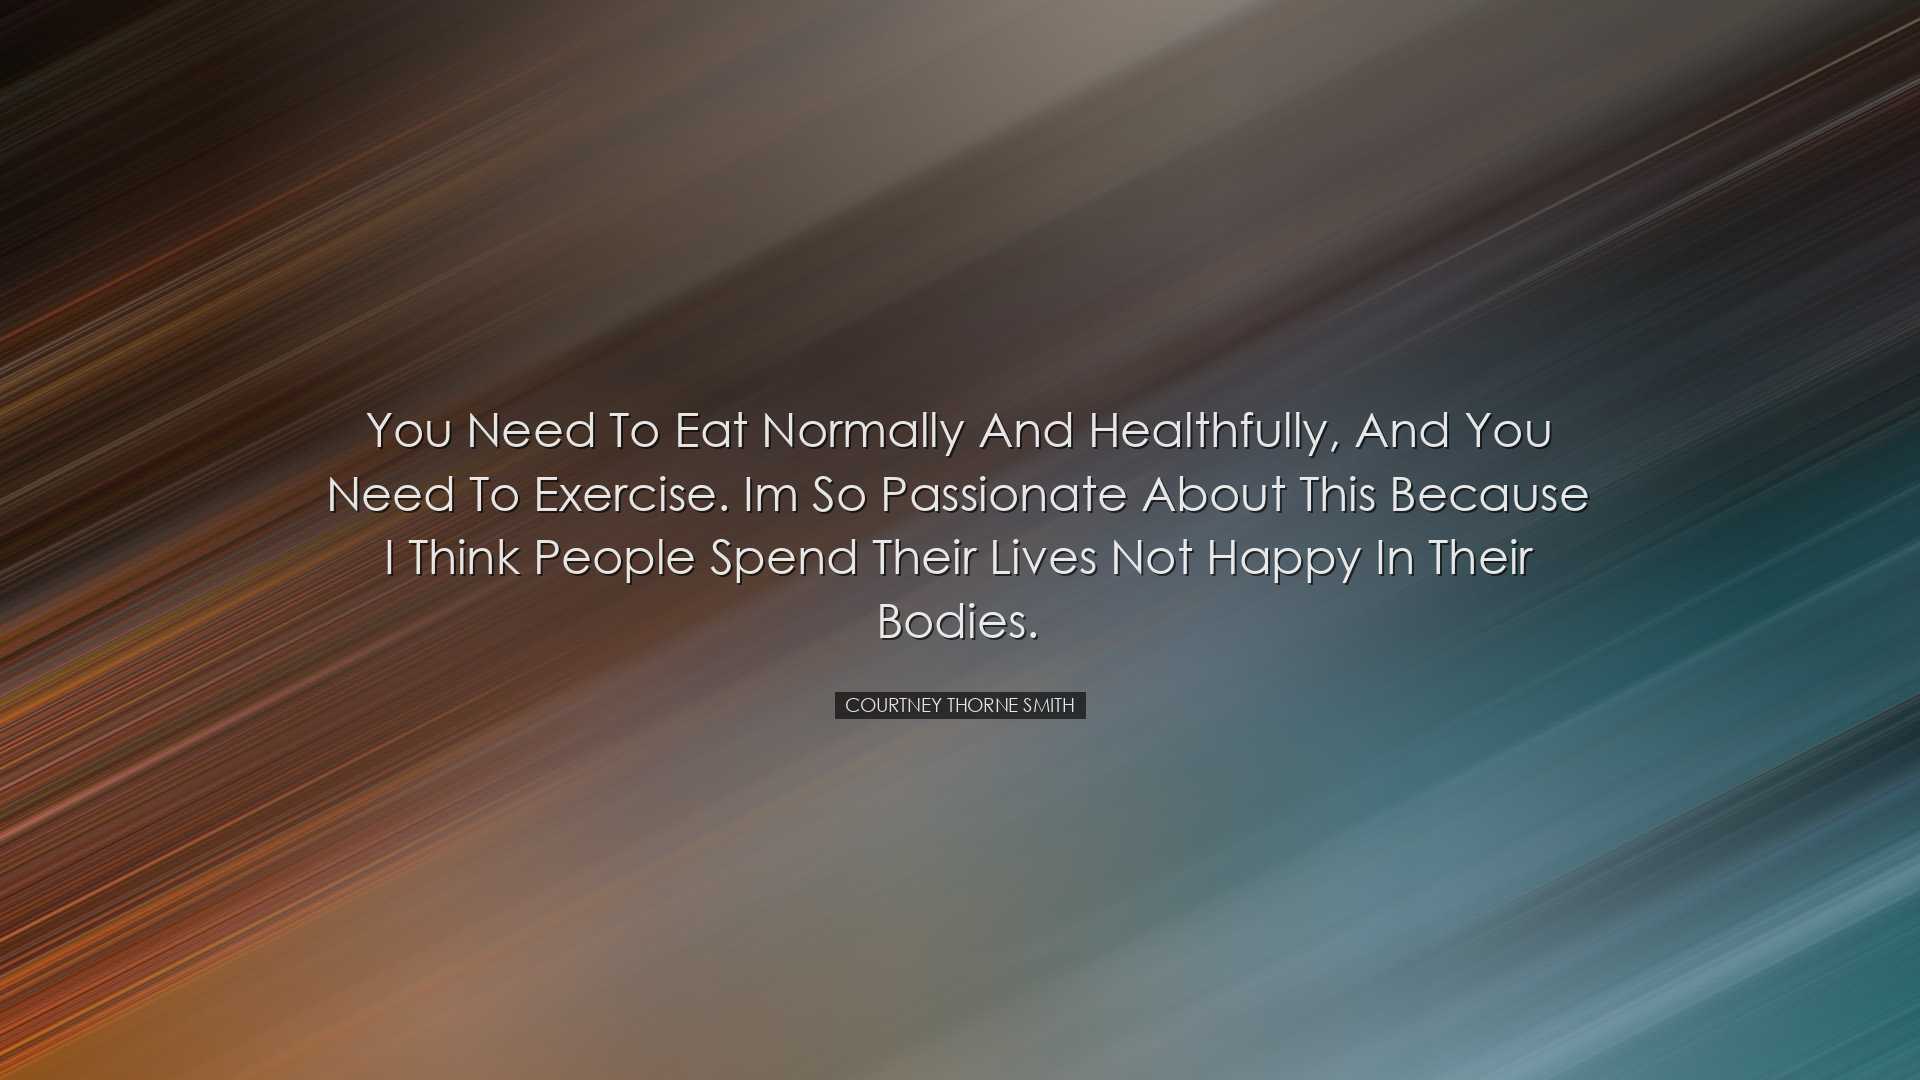 You need to eat normally and healthfully, and you need to exercise